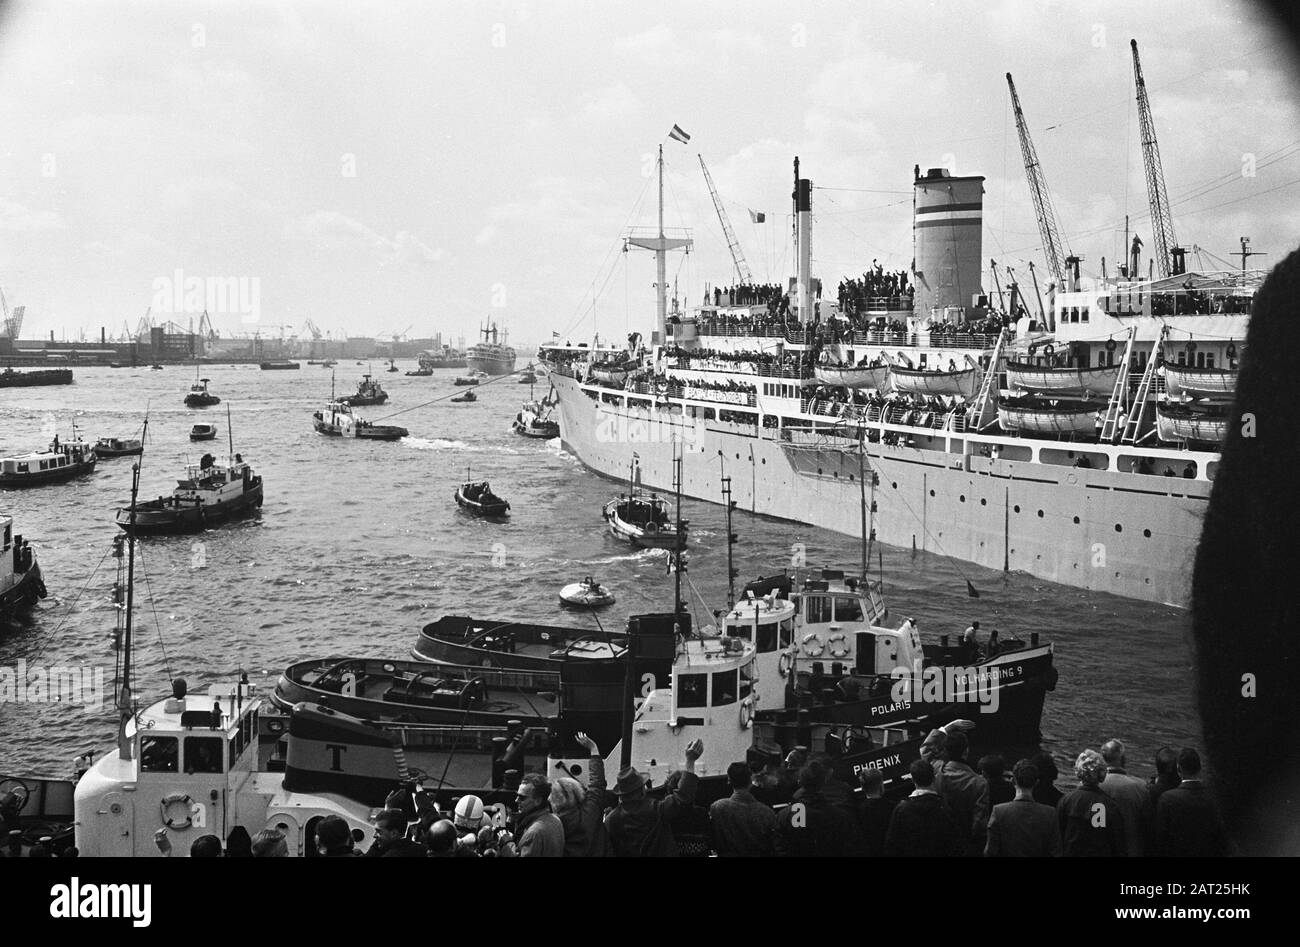 Feijenoordsupporters to Lisbon. Departure of ships Groote Beer and Waterman  from Rotterdam Date: 4 May 1963 Location: Rotterdam, Zuid-Holland Keywords:  ships, sports, supporters, football Institution name: Feyenoord Stock Photo  - Alamy